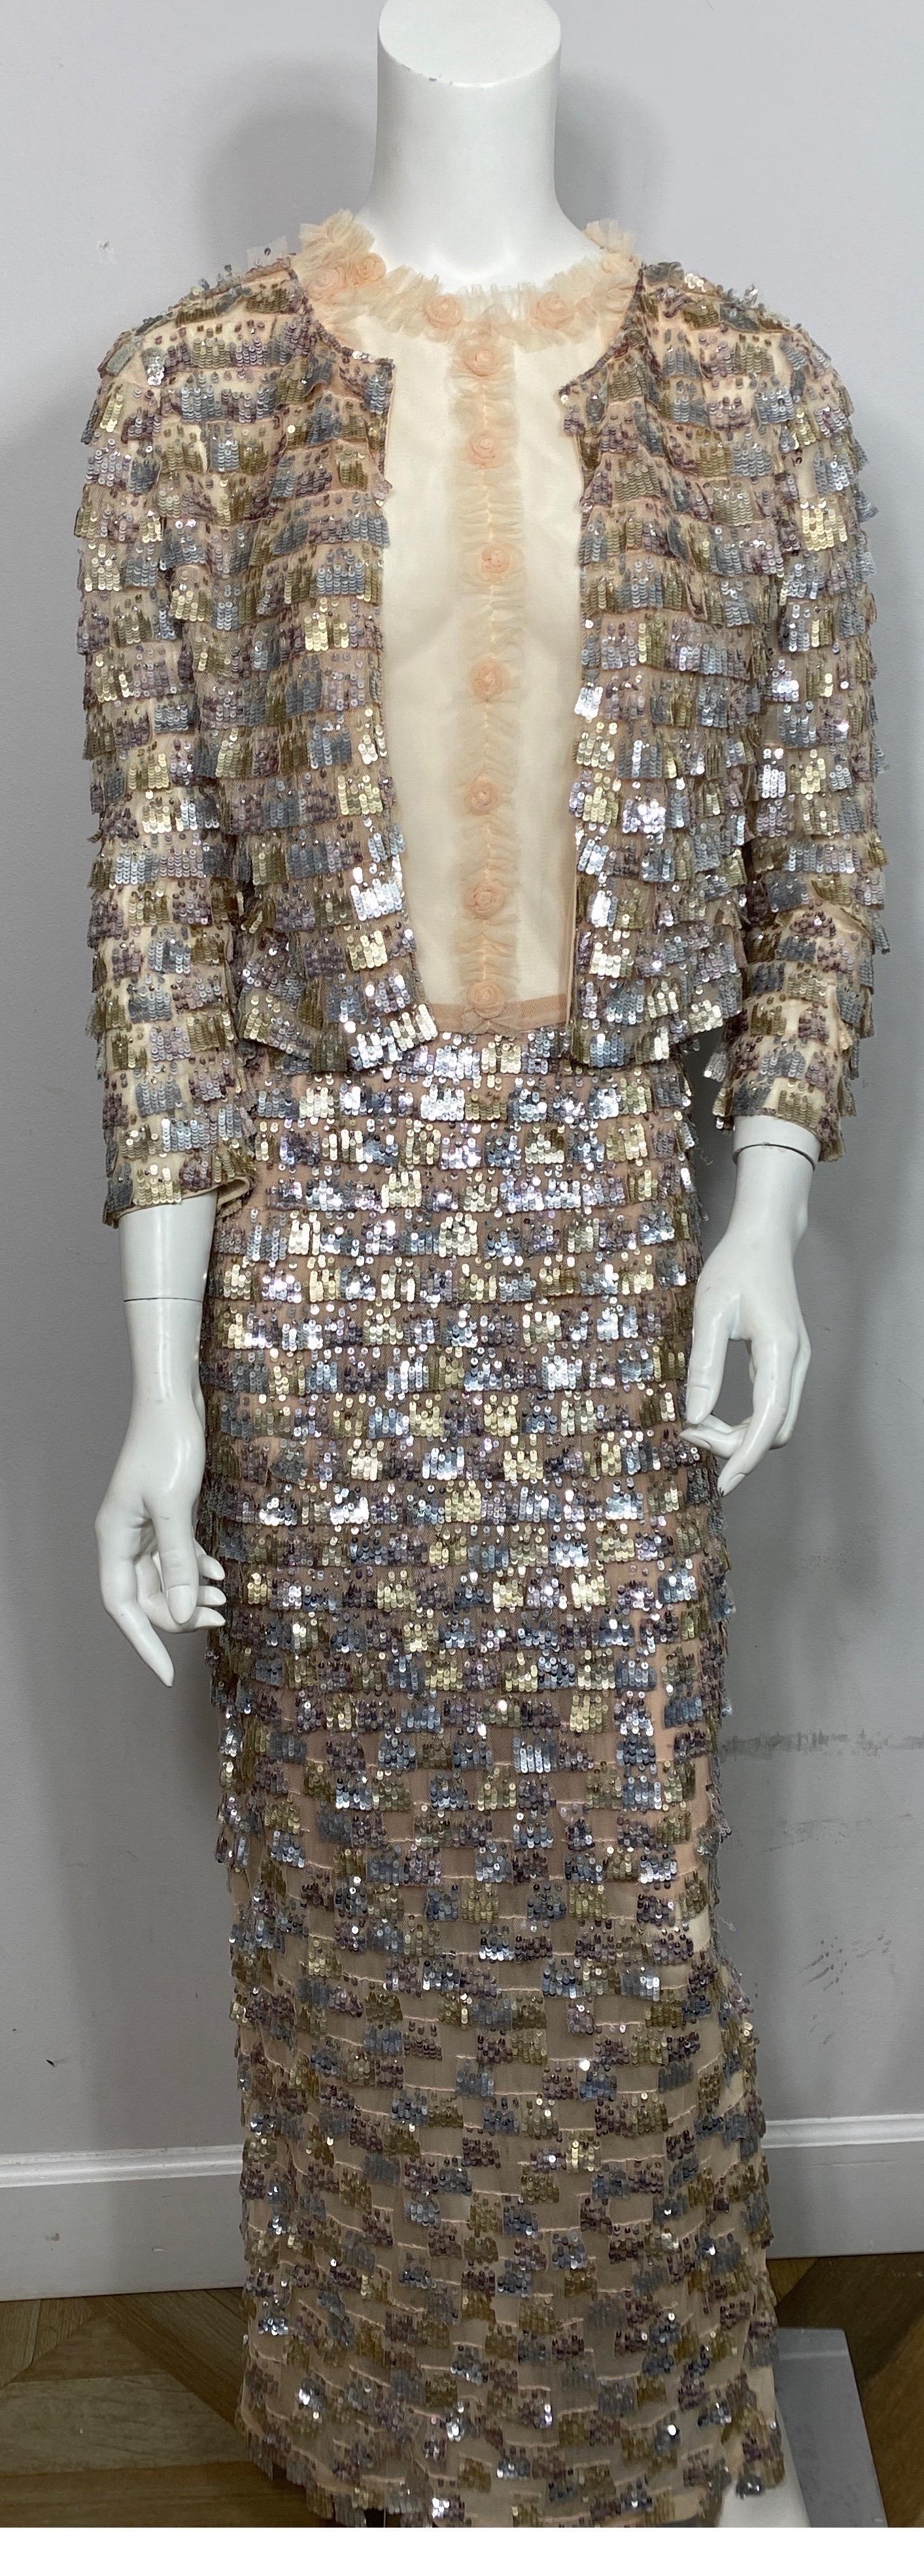 Oscar de la Renta Early 2000’s Nude and Metallic Gown with Jacket-Size 4  This gorgeous Oscar de la Renta 2 piece gown is a classic Oscar creation. The sleeveless bodice of the gown is a transparent nude colored mesh that has a ruffle and mini rose